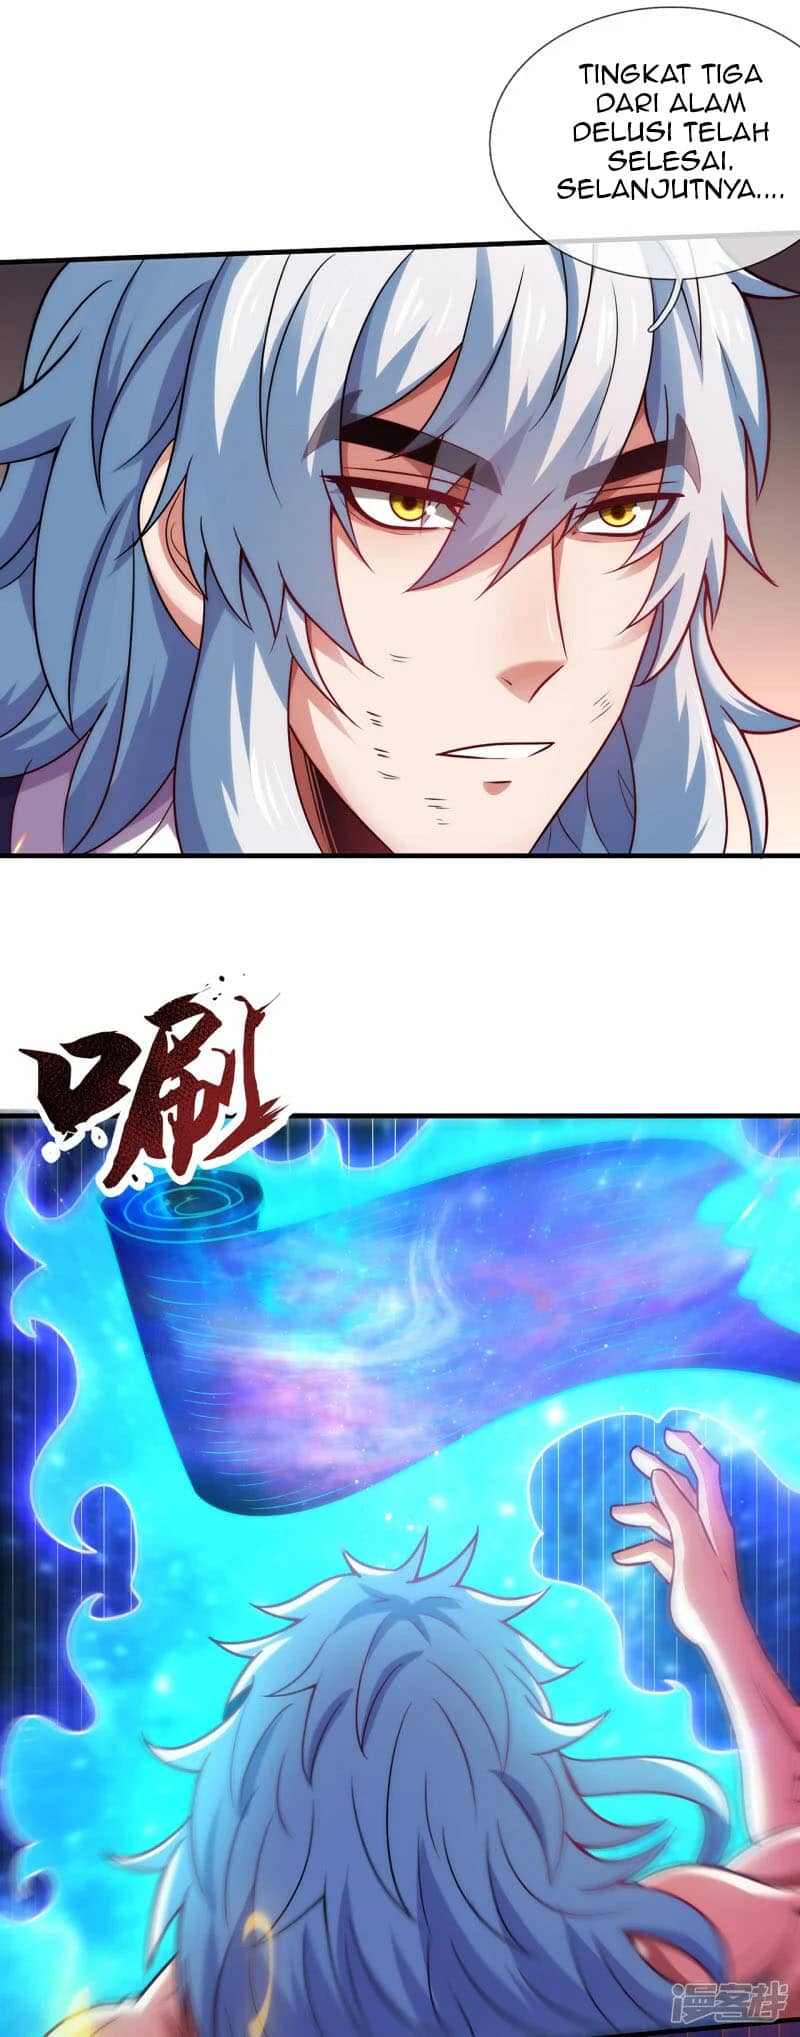 Xuantian Supreme Chapter 81